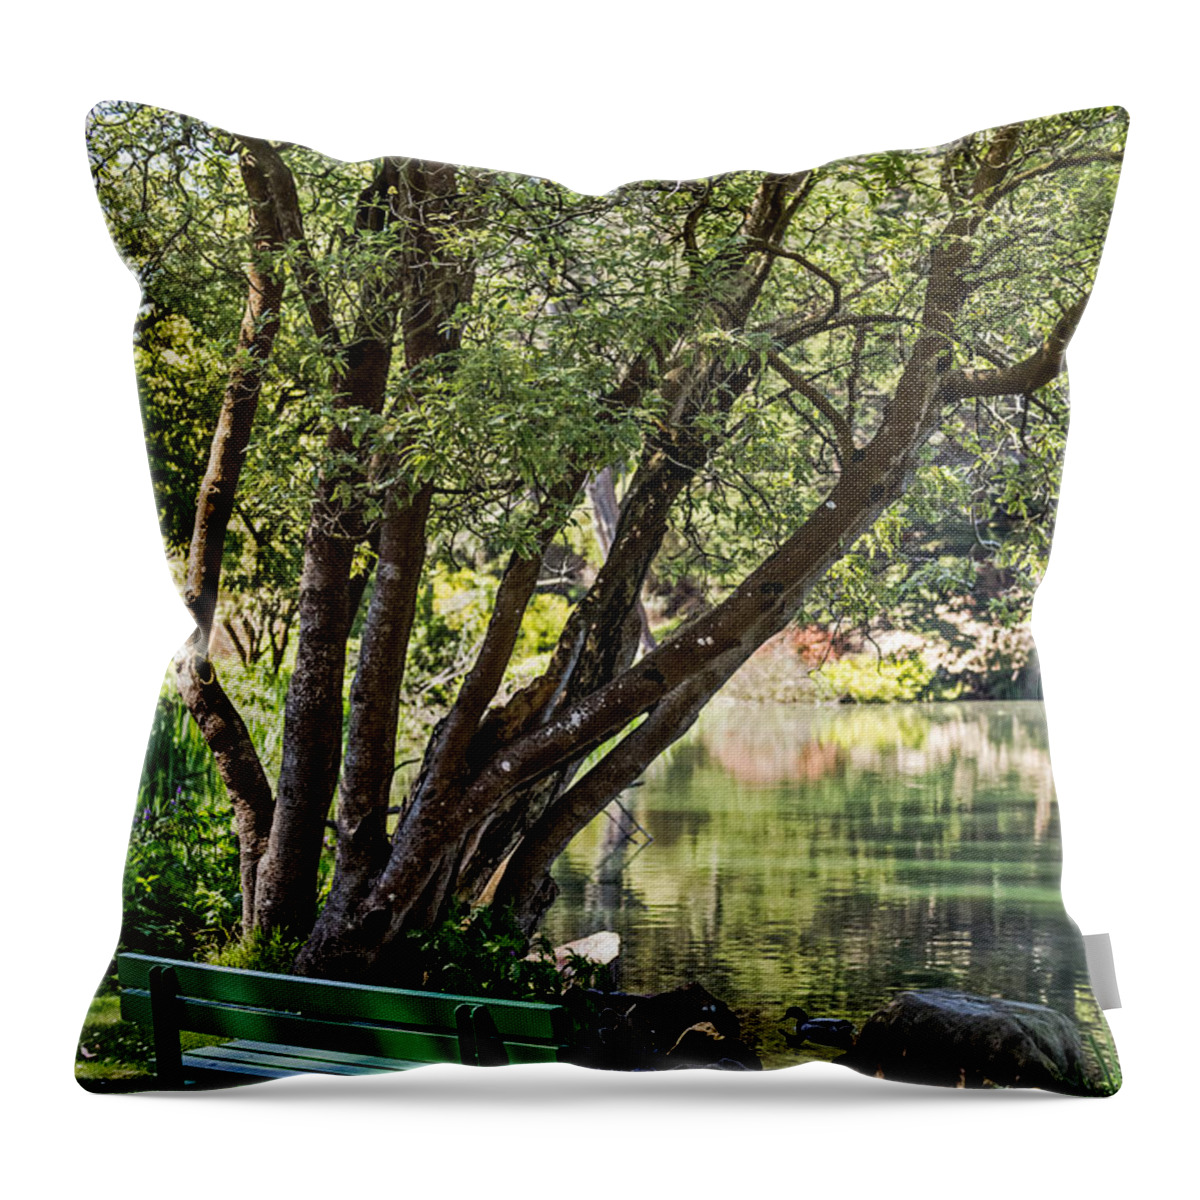 Bench Throw Pillow featuring the photograph Stow Lake Bench by Kate Brown